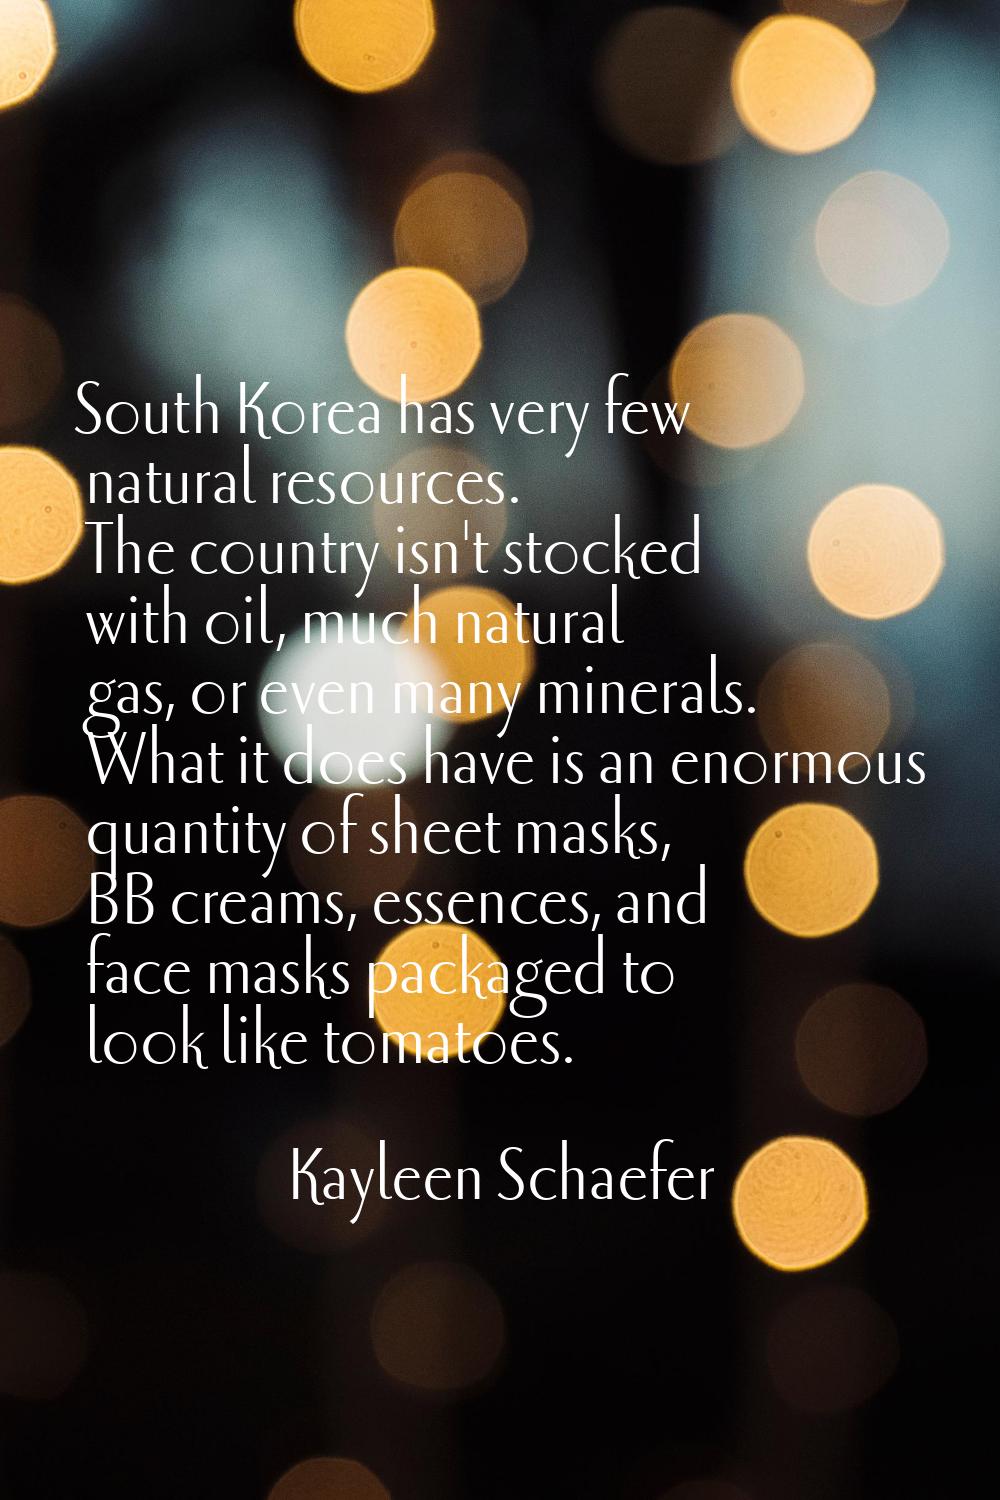 South Korea has very few natural resources. The country isn't stocked with oil, much natural gas, o